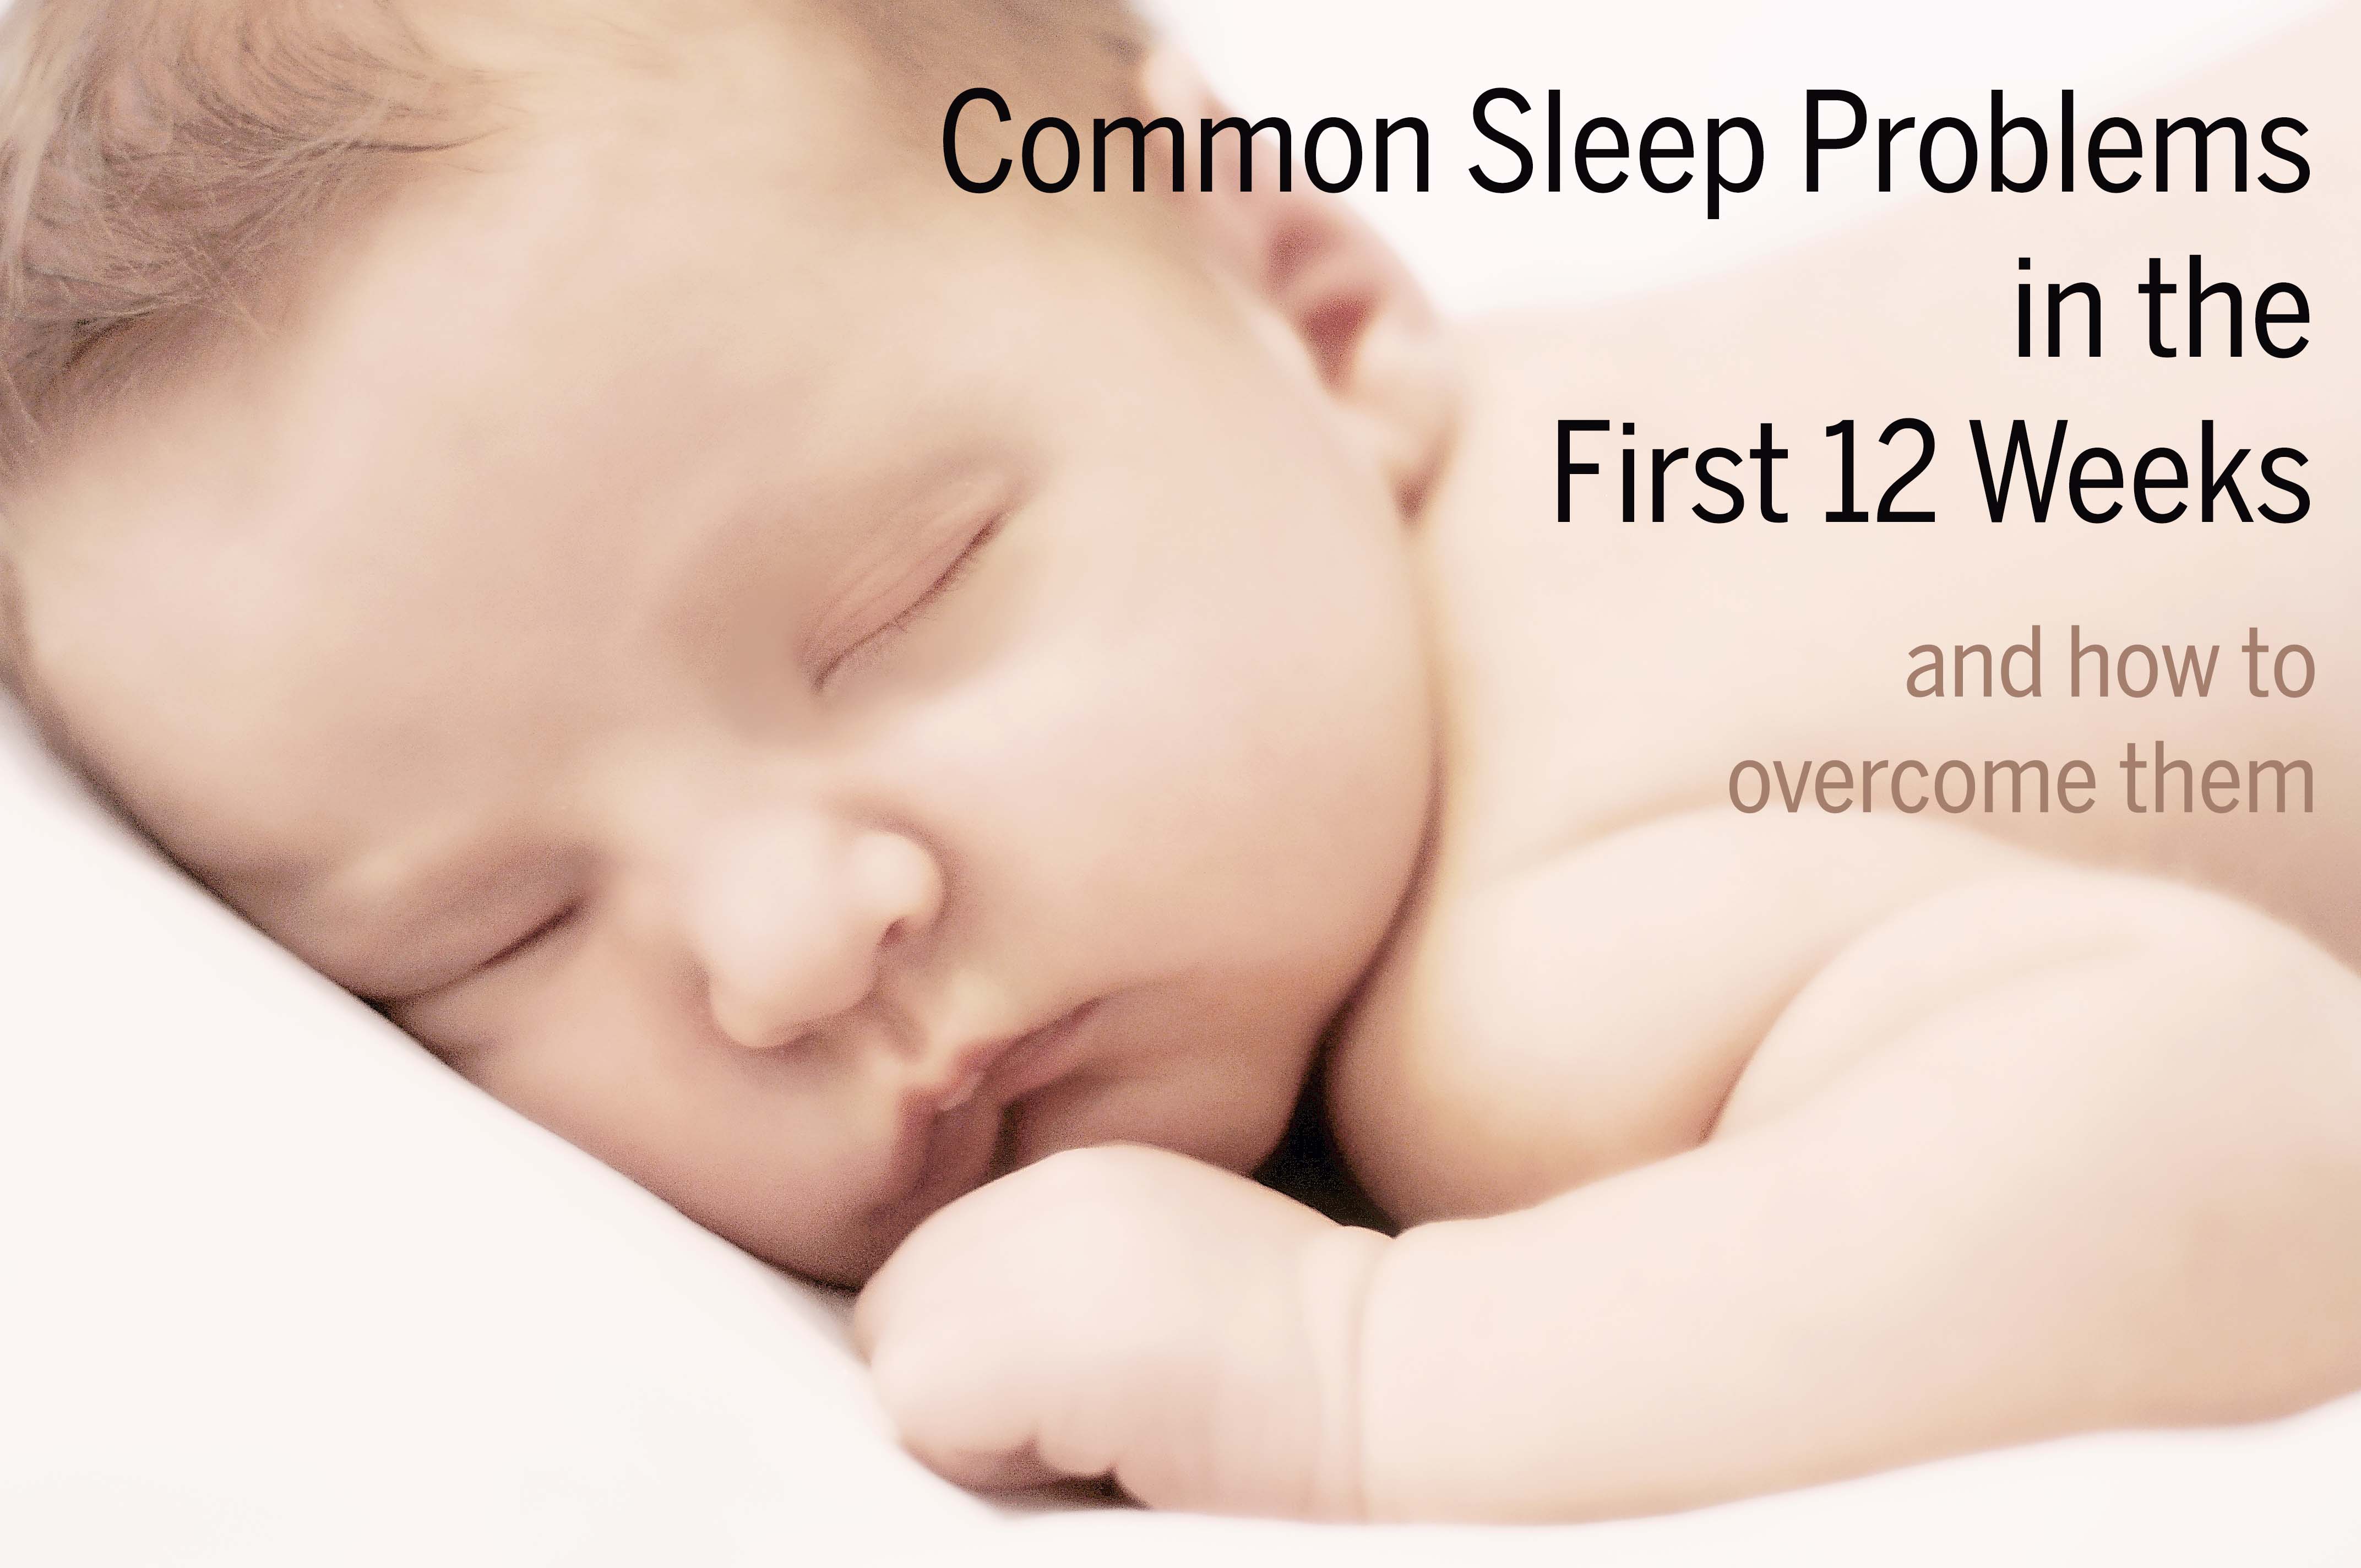 Common Sleep Problems in the First 12 Weeks